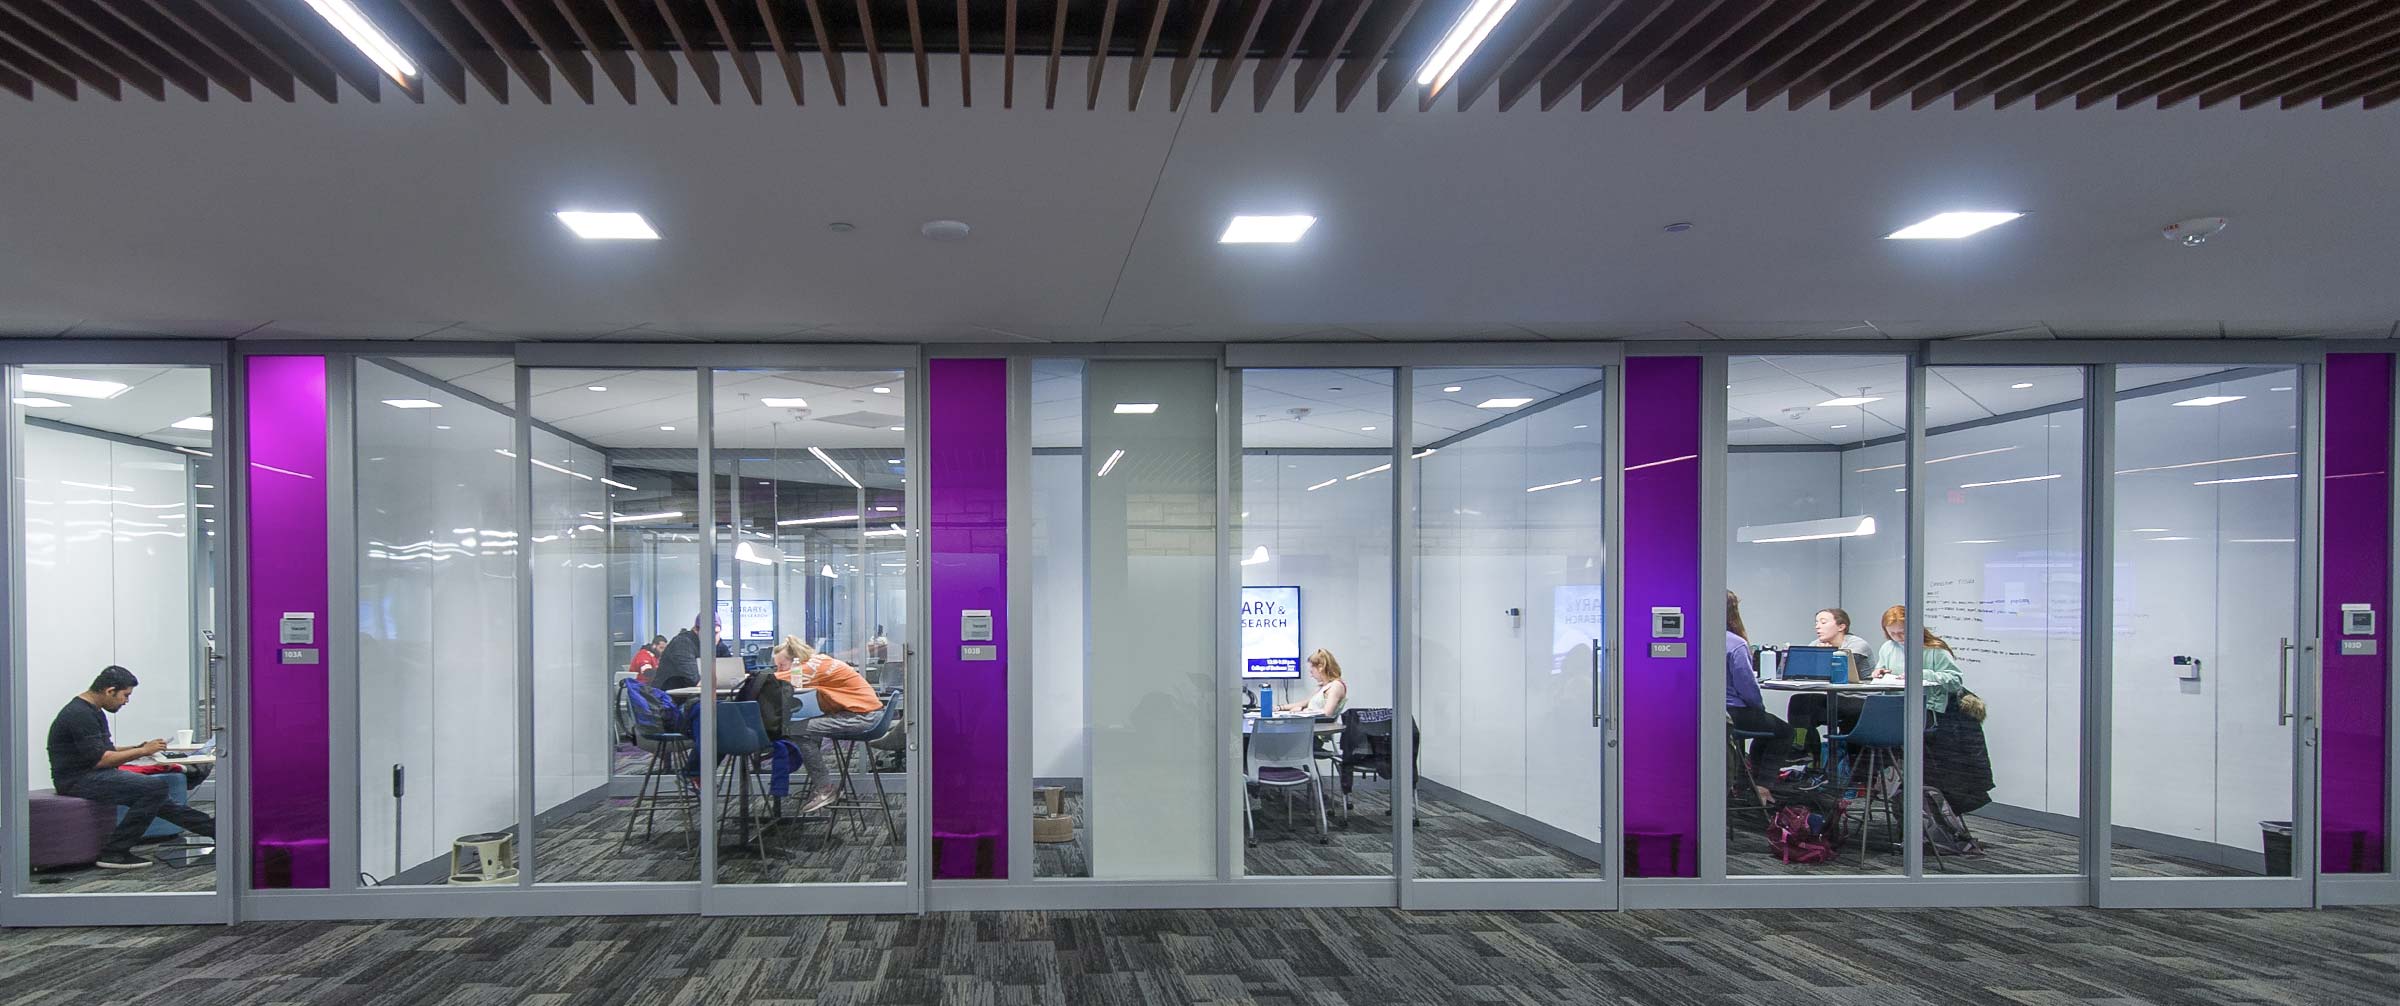 Hale Library collaboration rooms